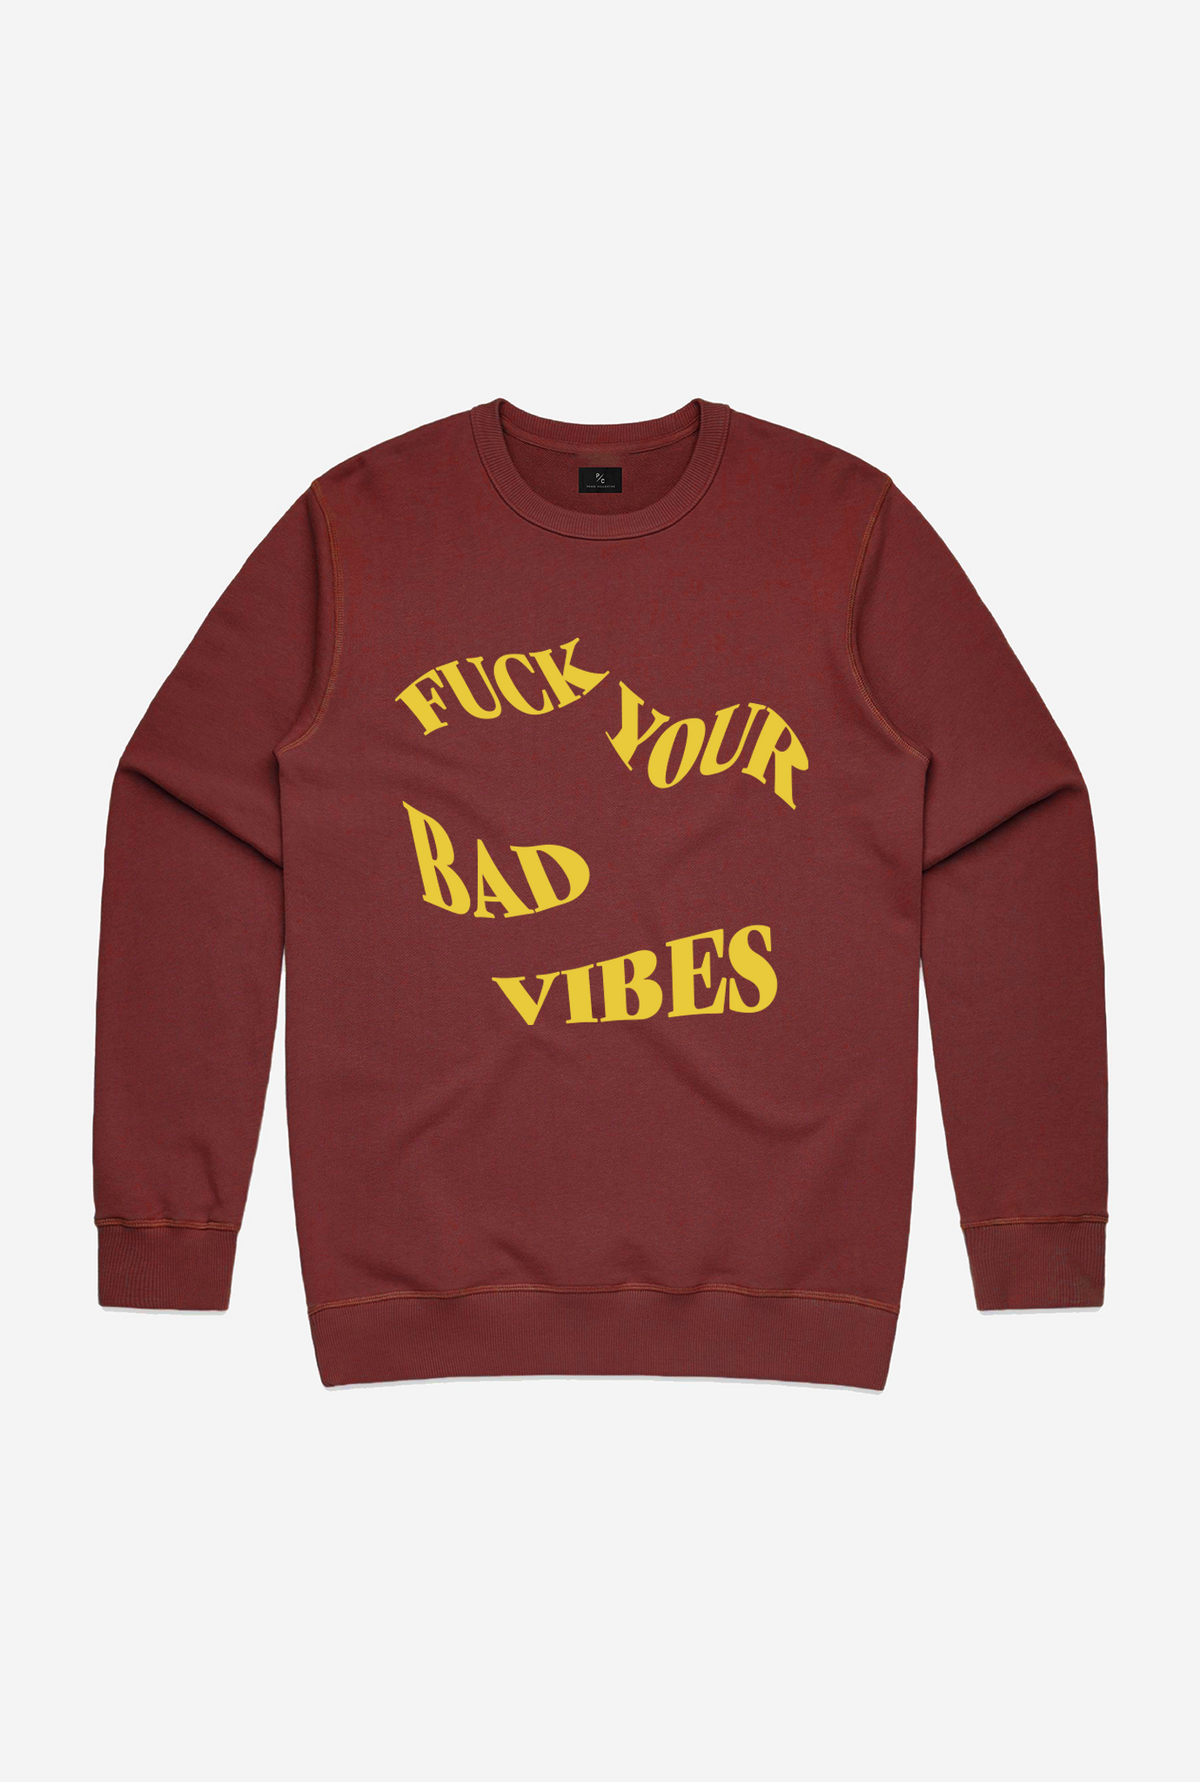 Fuck Your Bad Vibes Waved Graphic Crewneck - Maroon